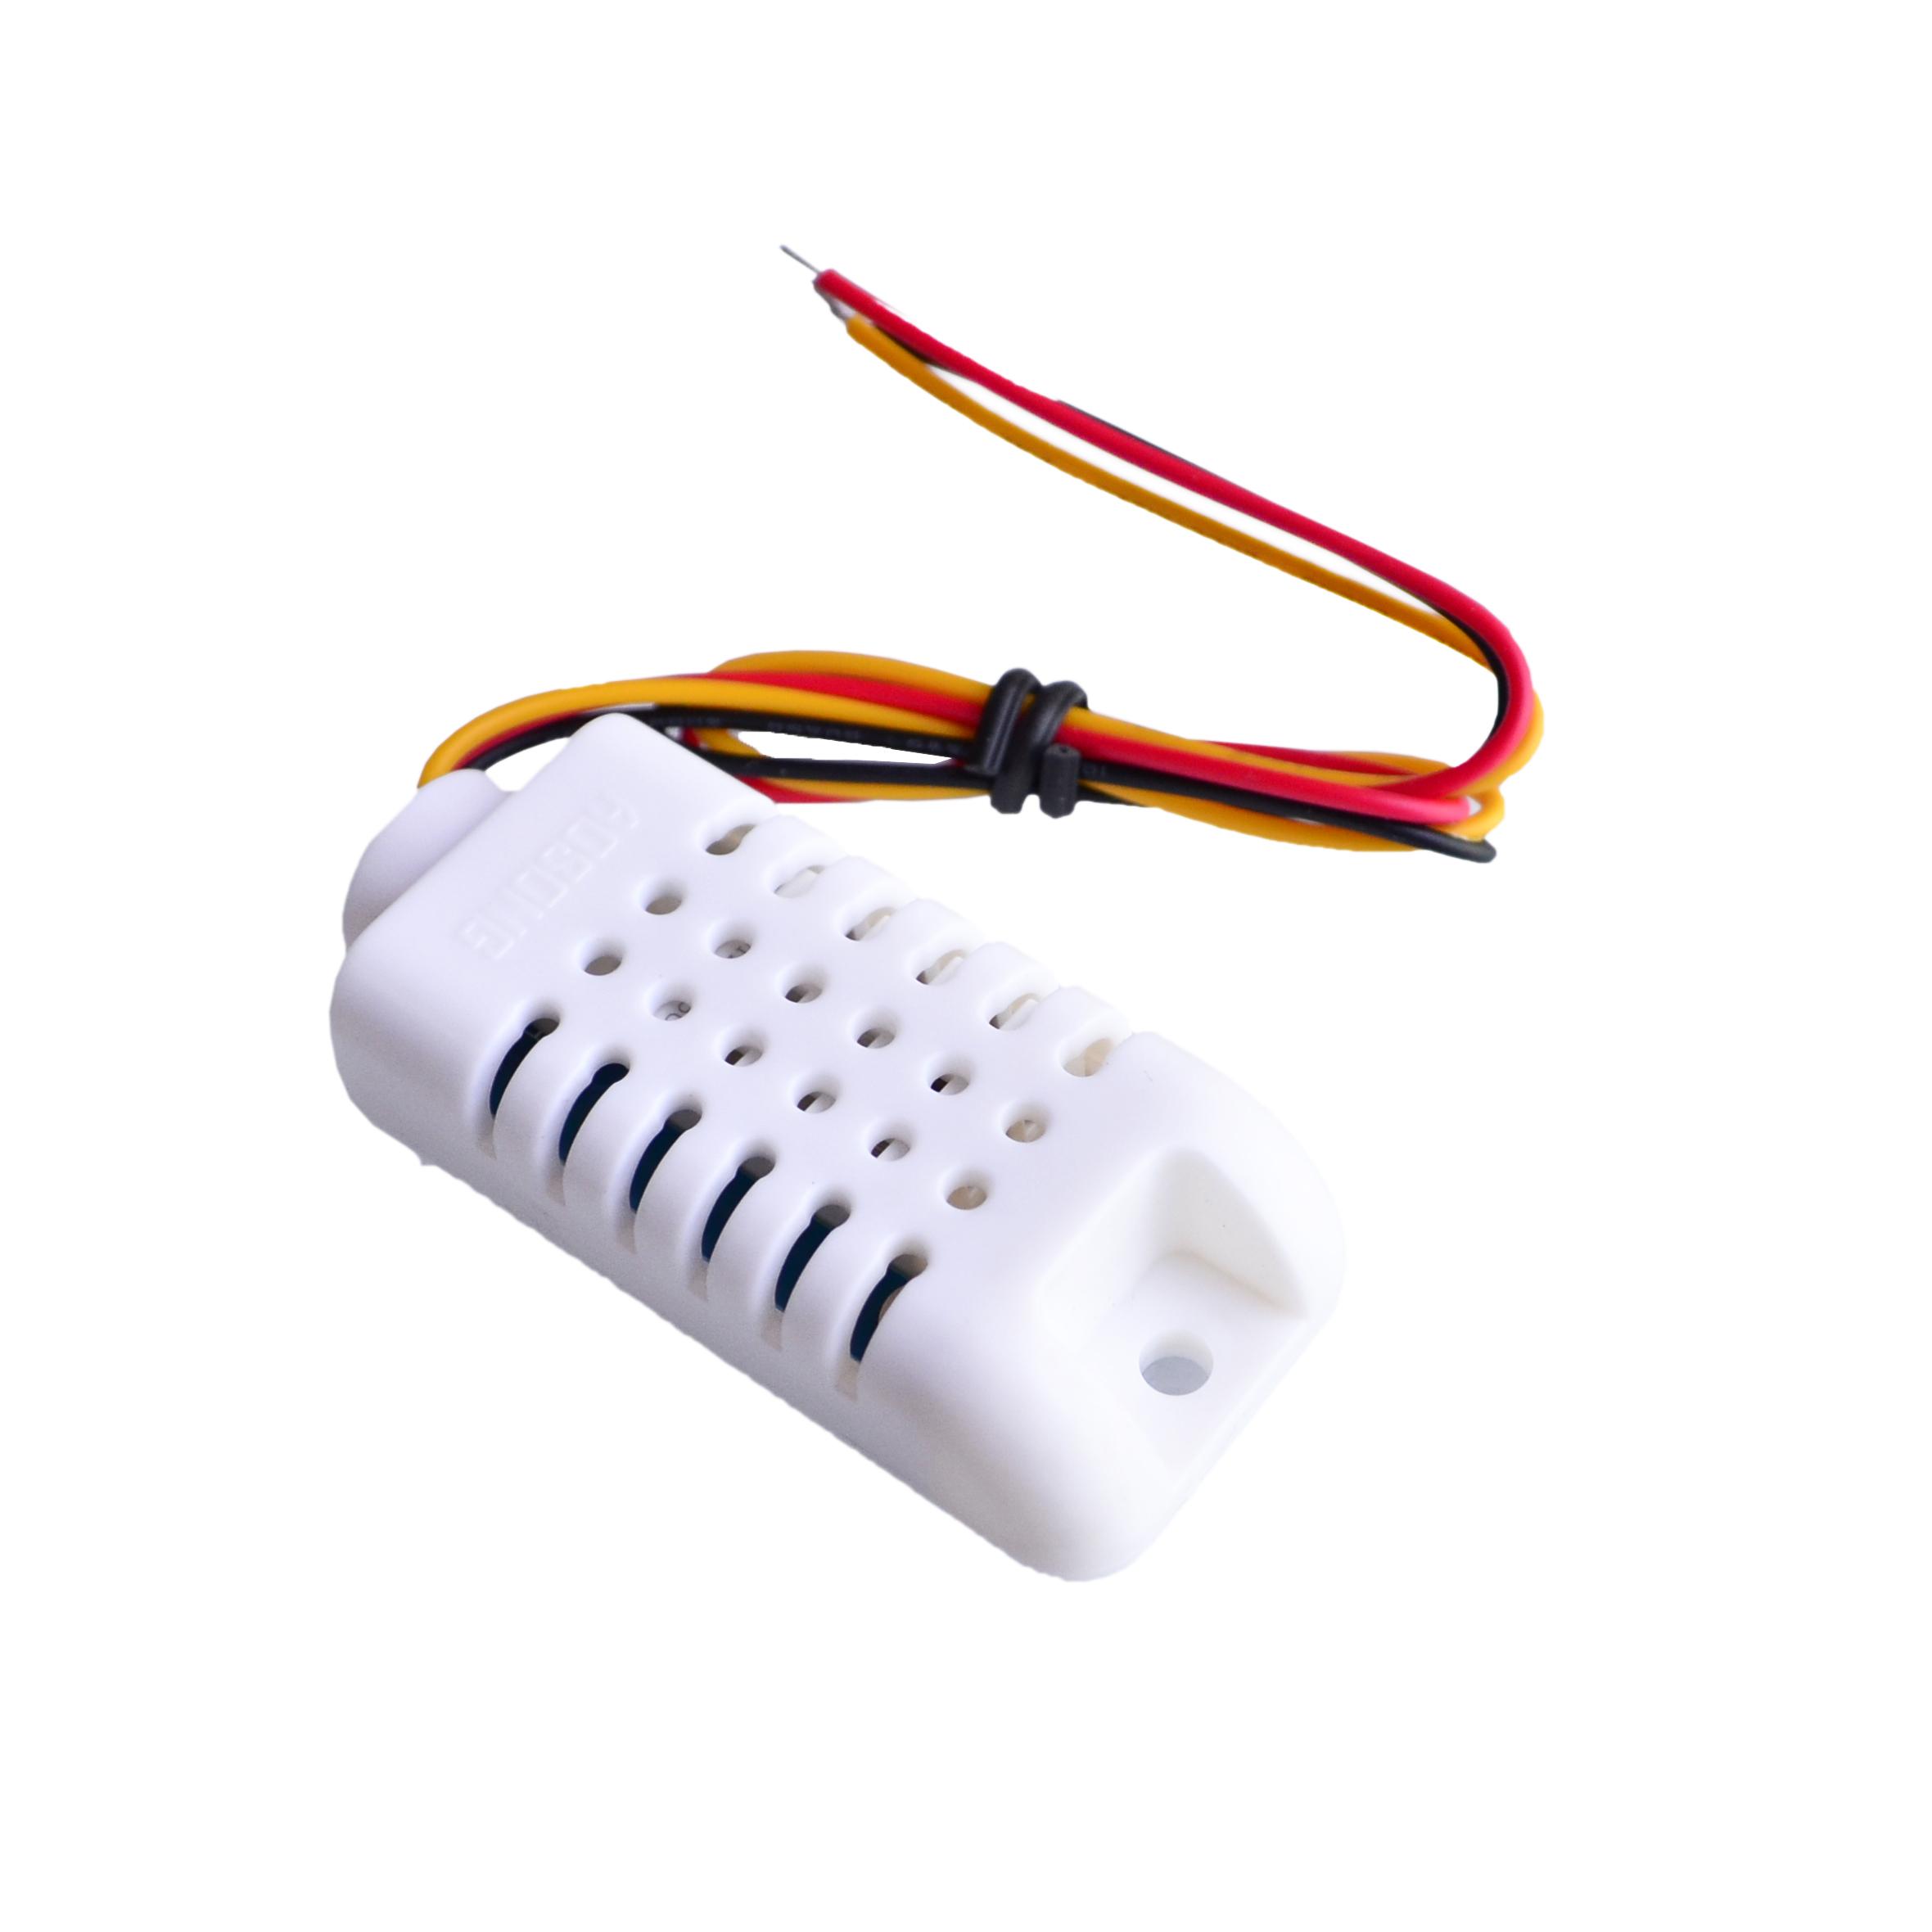 1PCSX Wired DHT22/AM2302 Digital Temperature and Humidity Sensor AM2302